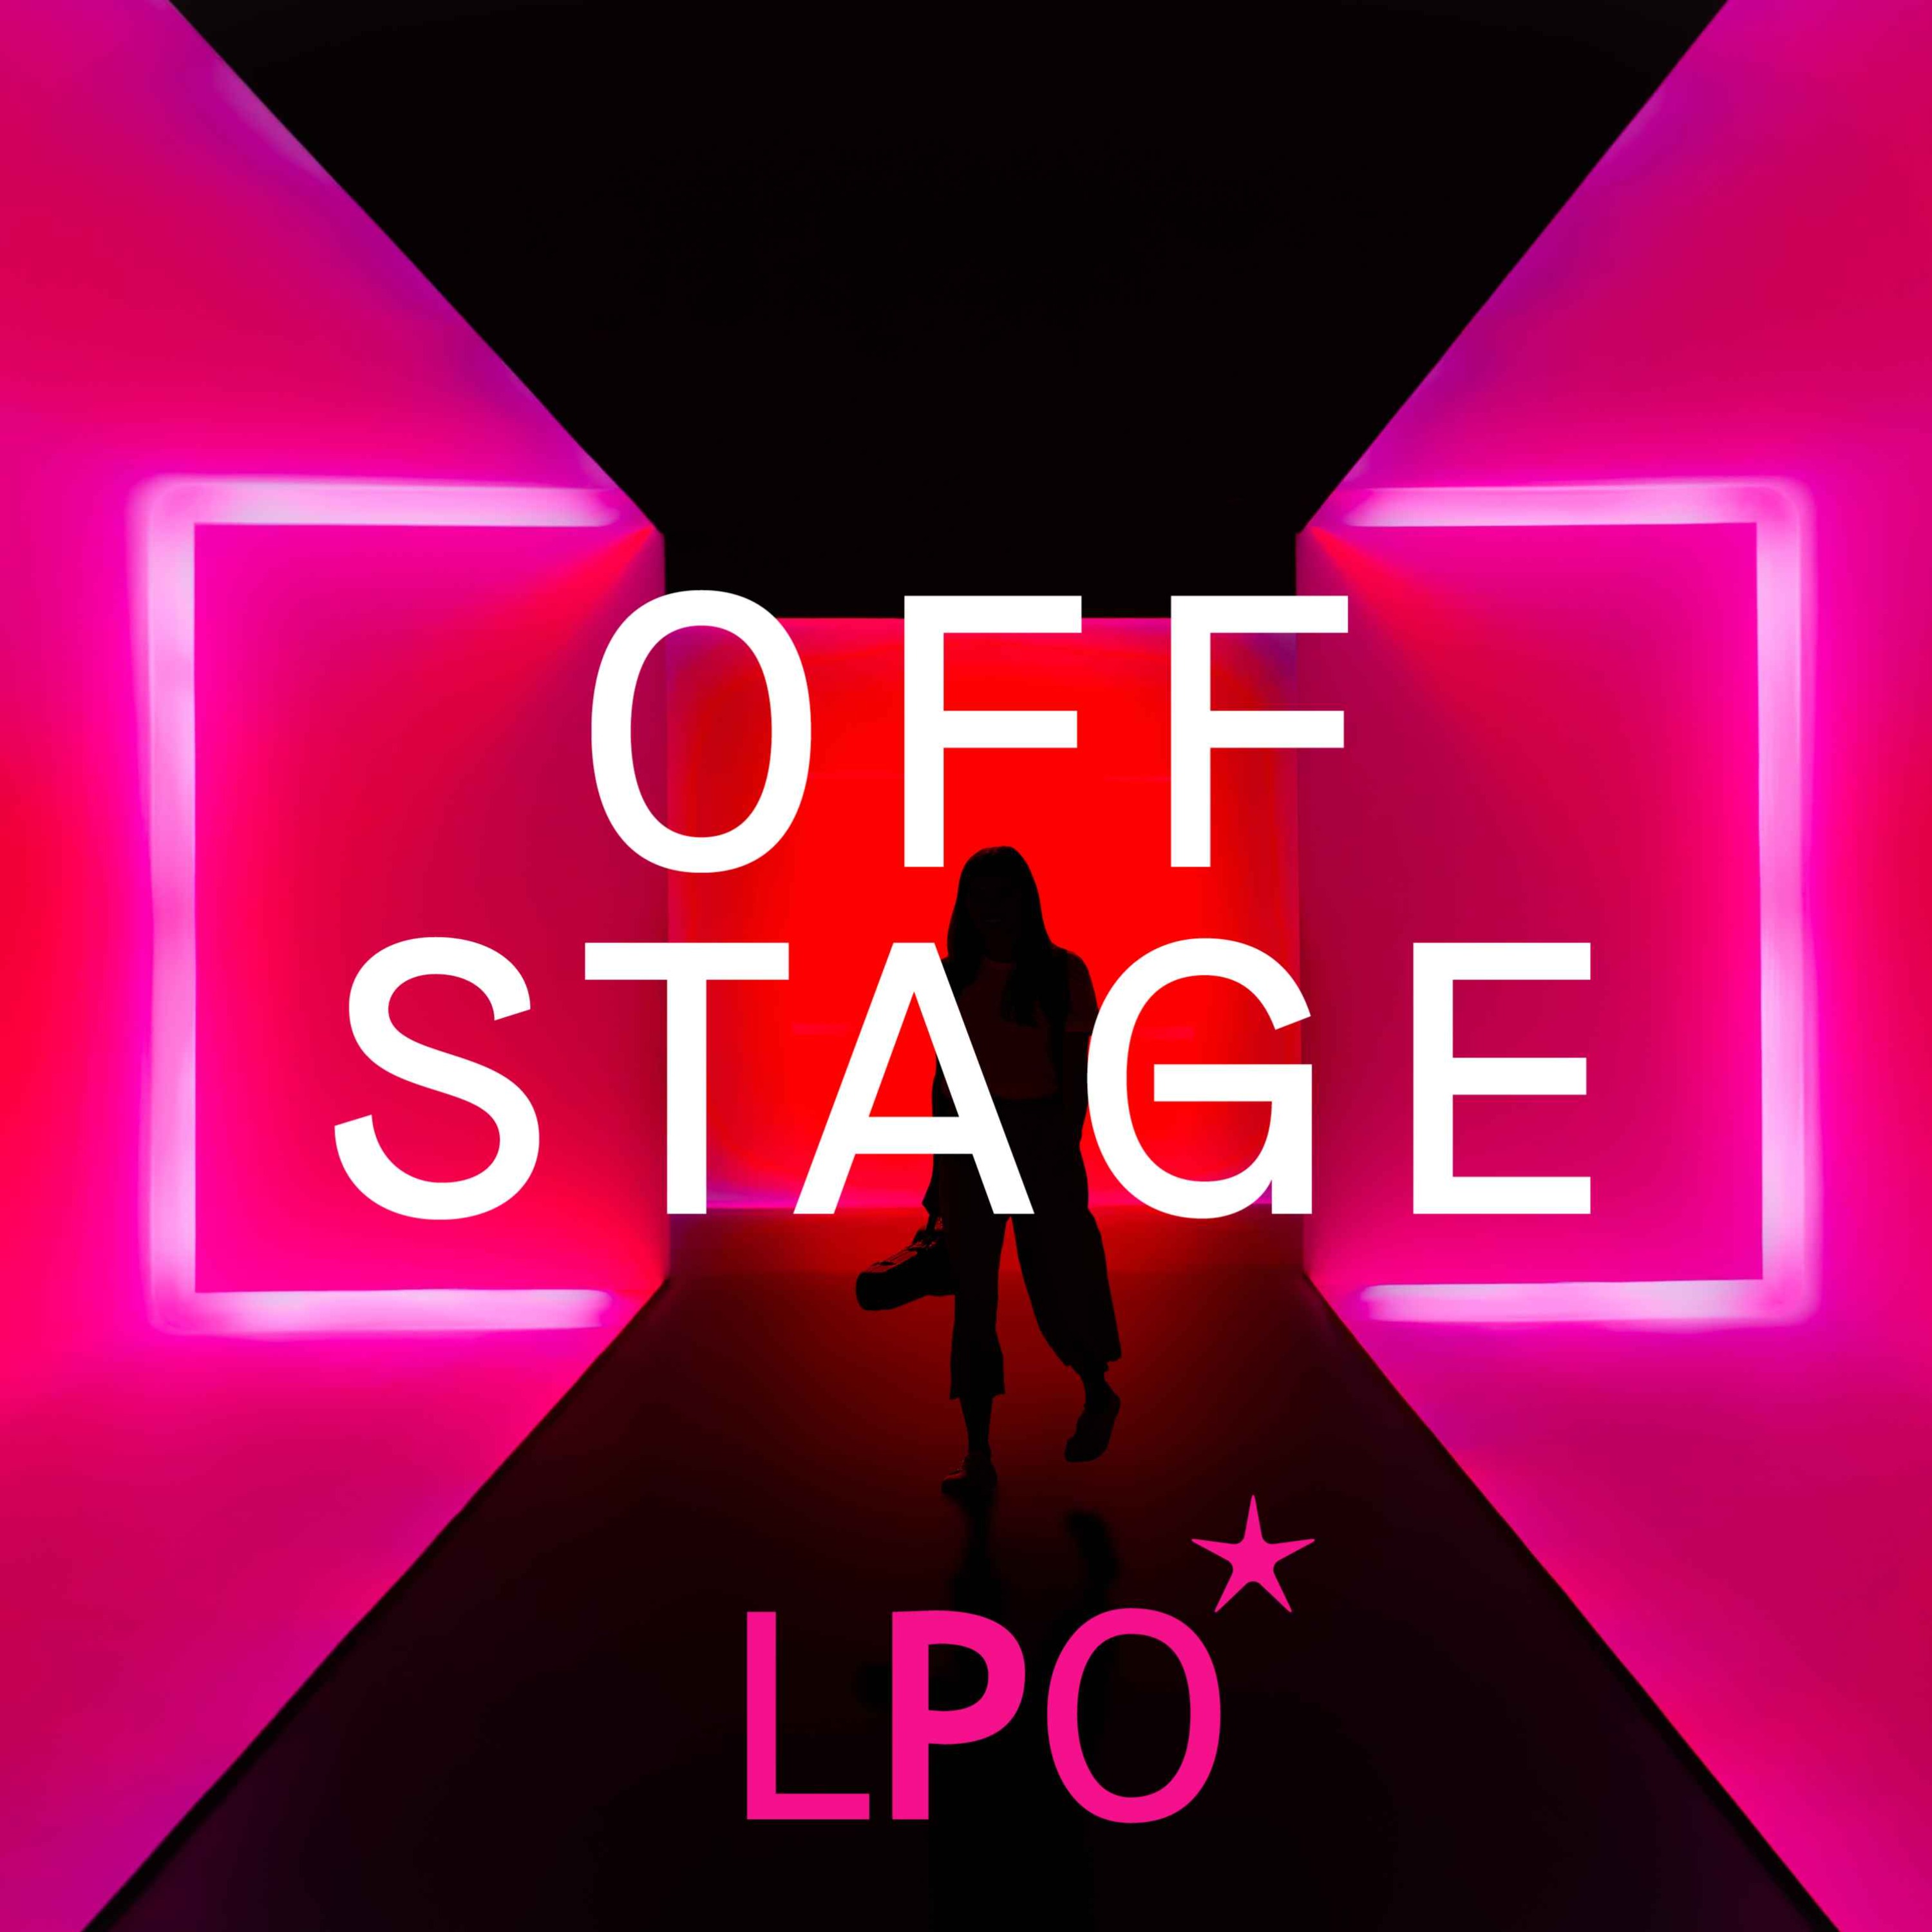 Merry Christmas from LPO Offstage!